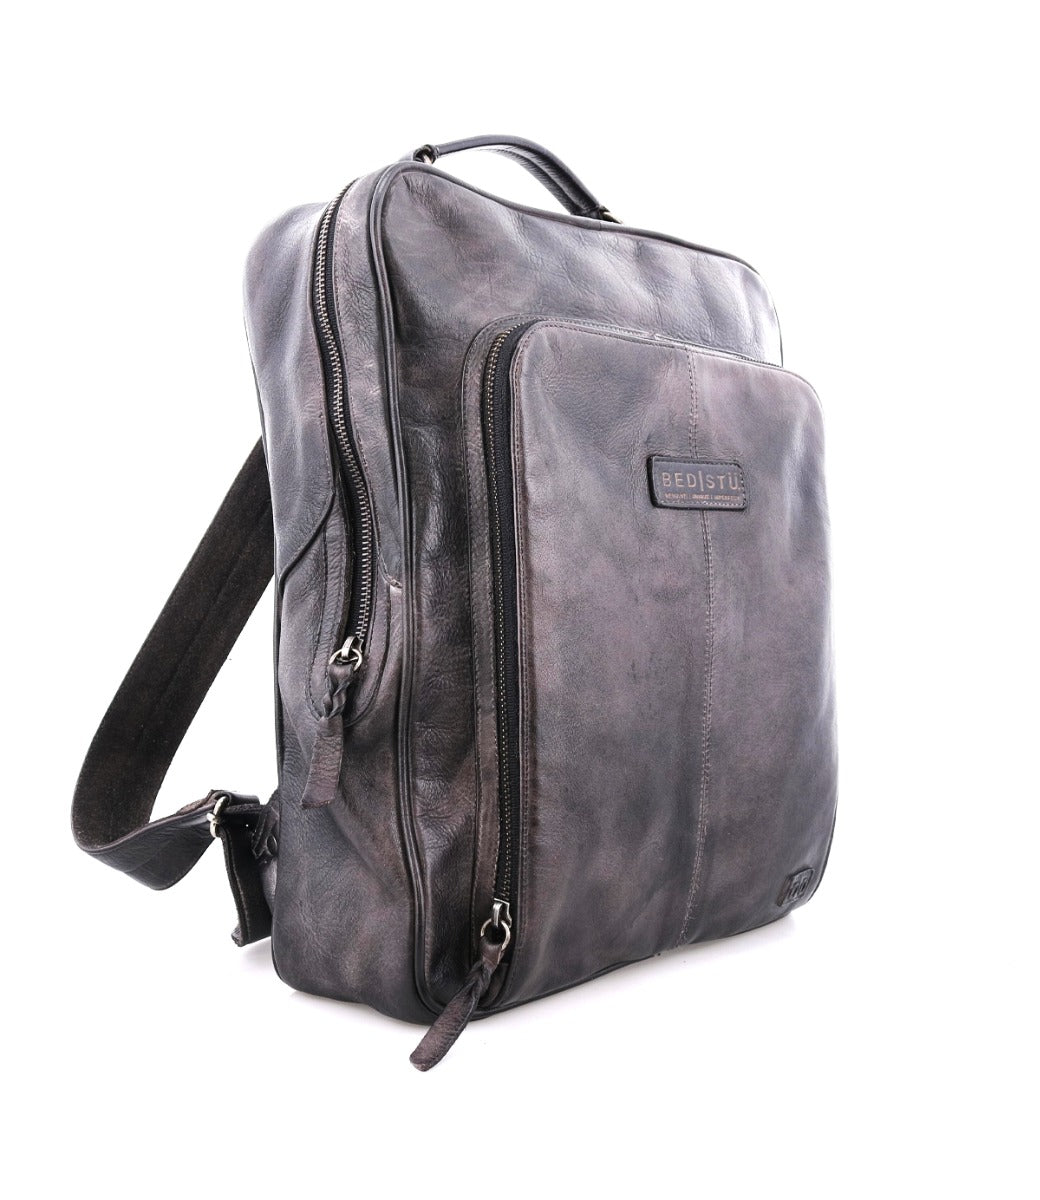 A Rozes by Bed Stu grey leather backpack on a white background.